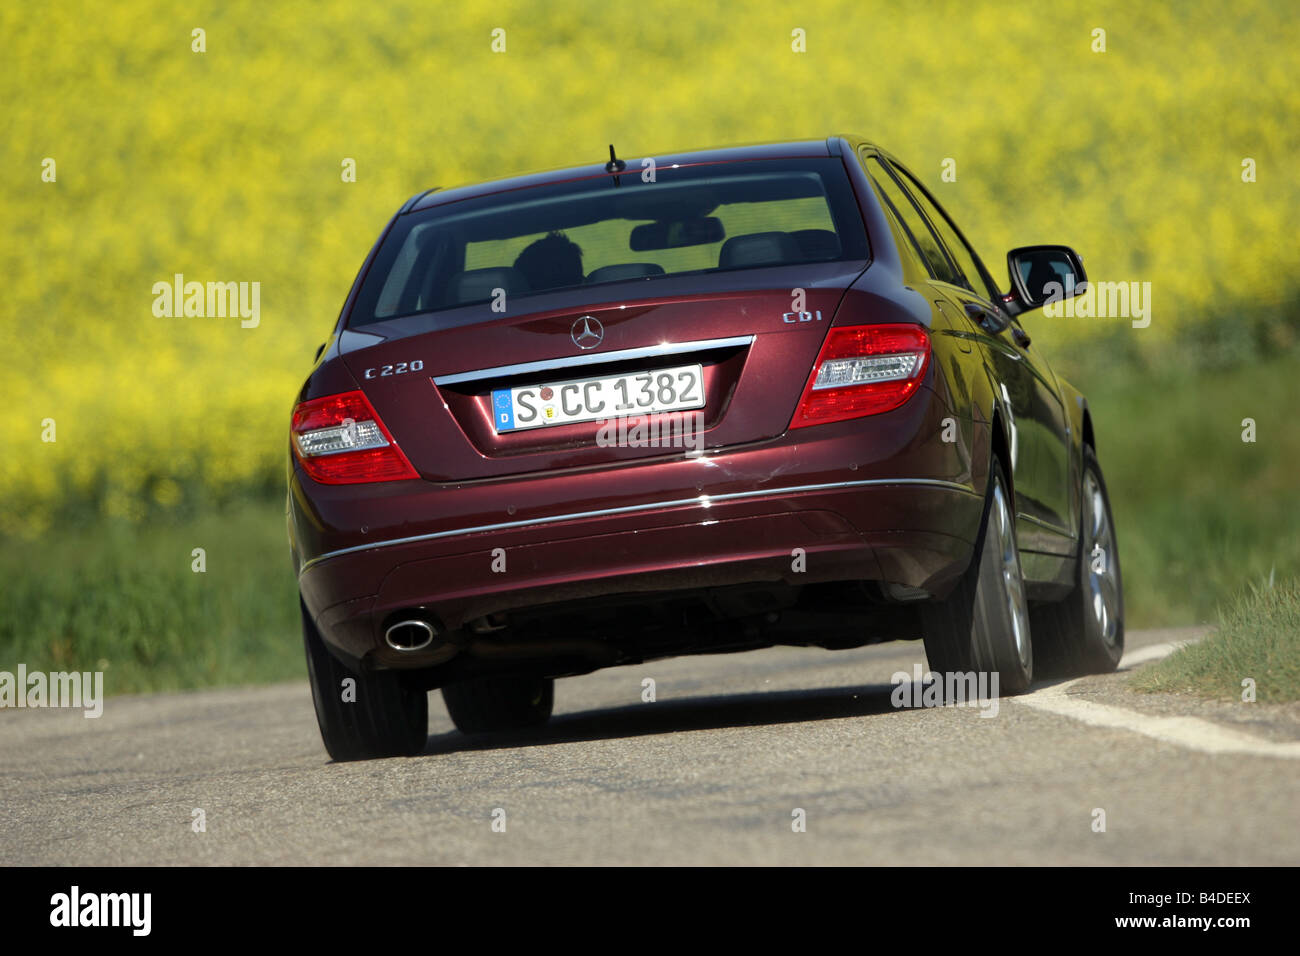 Mercedes C 220 CDI Avantgarde, model year 2007-, ruby colored, driving,  diagonal from the back, rear view, country road Stock Photo - Alamy